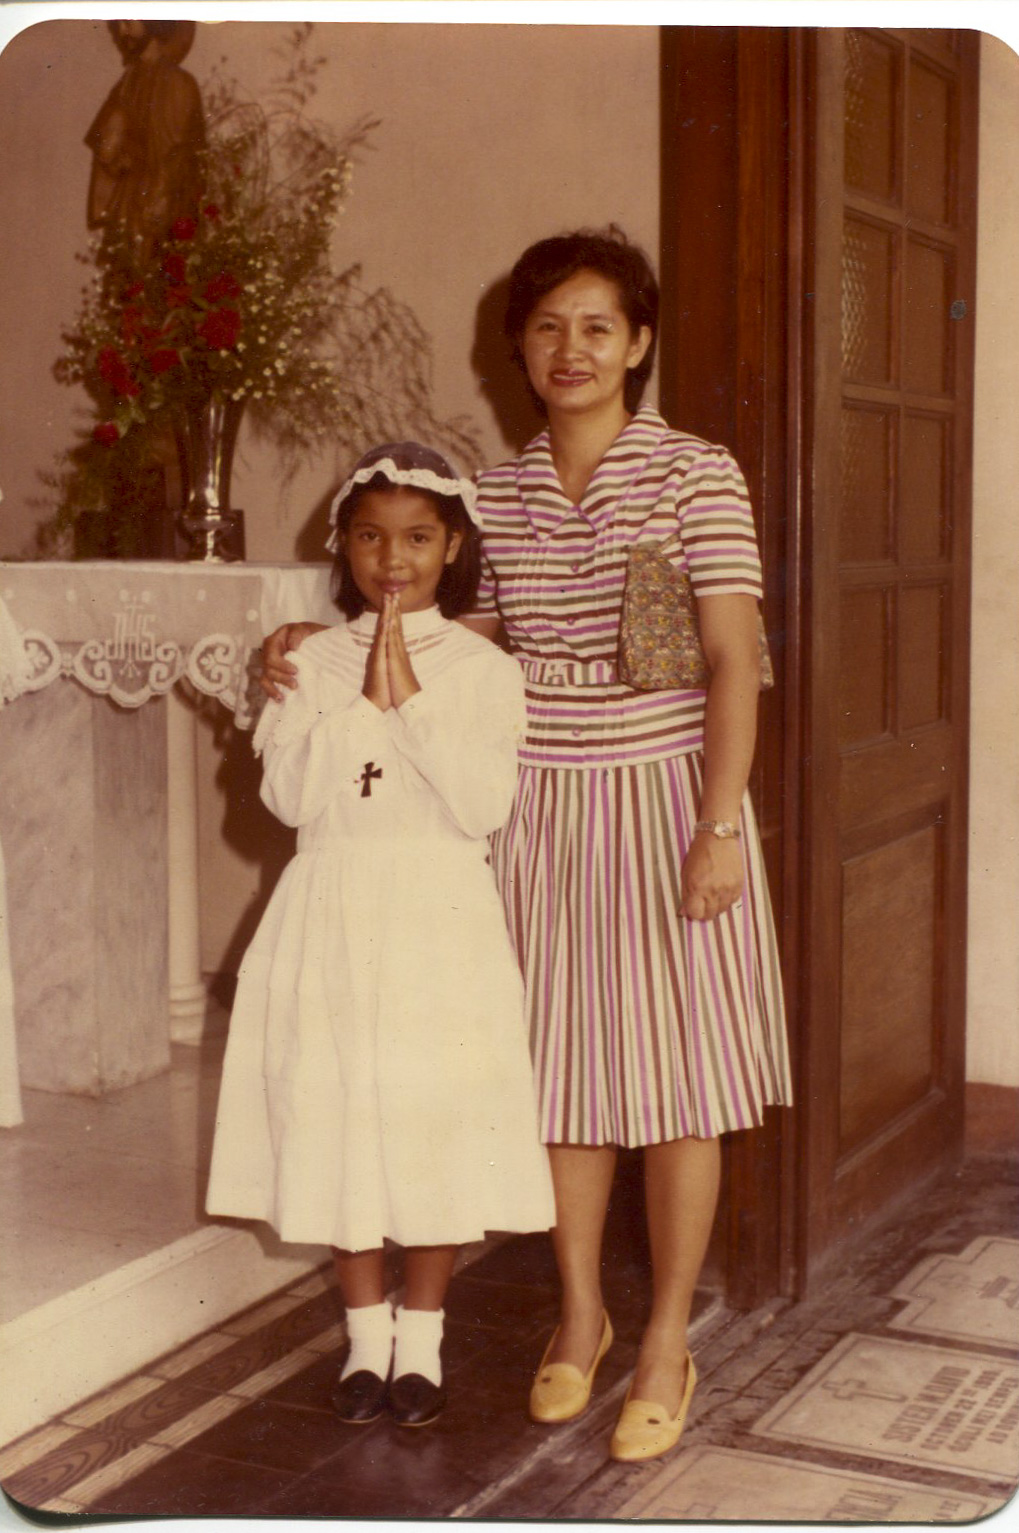 Photo of Escarilla-Carnate and mother, 1982Escarilla-Carnate said, “Taken in February or March 1982 by a professional photographer when I was in 2nd grade at Assumption School in Iloilo City. It was in a family album. Pictured are my mother and me. My catholic faith is important and I continue to practiceCatholicism here in the USA. My son has already had his first communion.” Any views, findings, conclusions, or recommendations expressed in this story do not necessarily represent those of the National Endowment for the Humanities. (c) Field Museum of Natural History - CC BY-NC 4.0